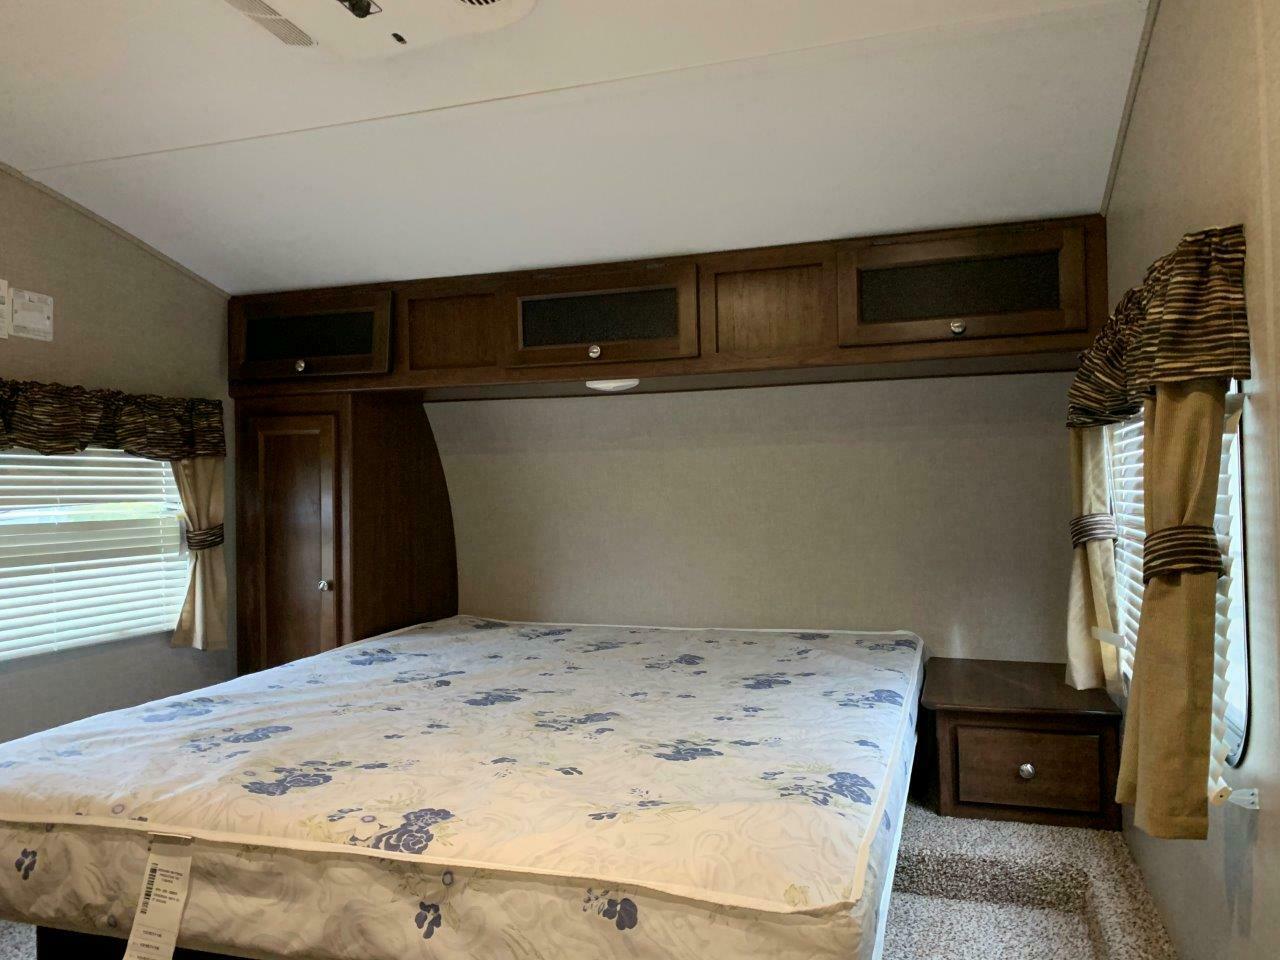 2018 Keystone Hideout 281dbs Rv Fifth, Rv With Bunk Beds And Bath And A Half